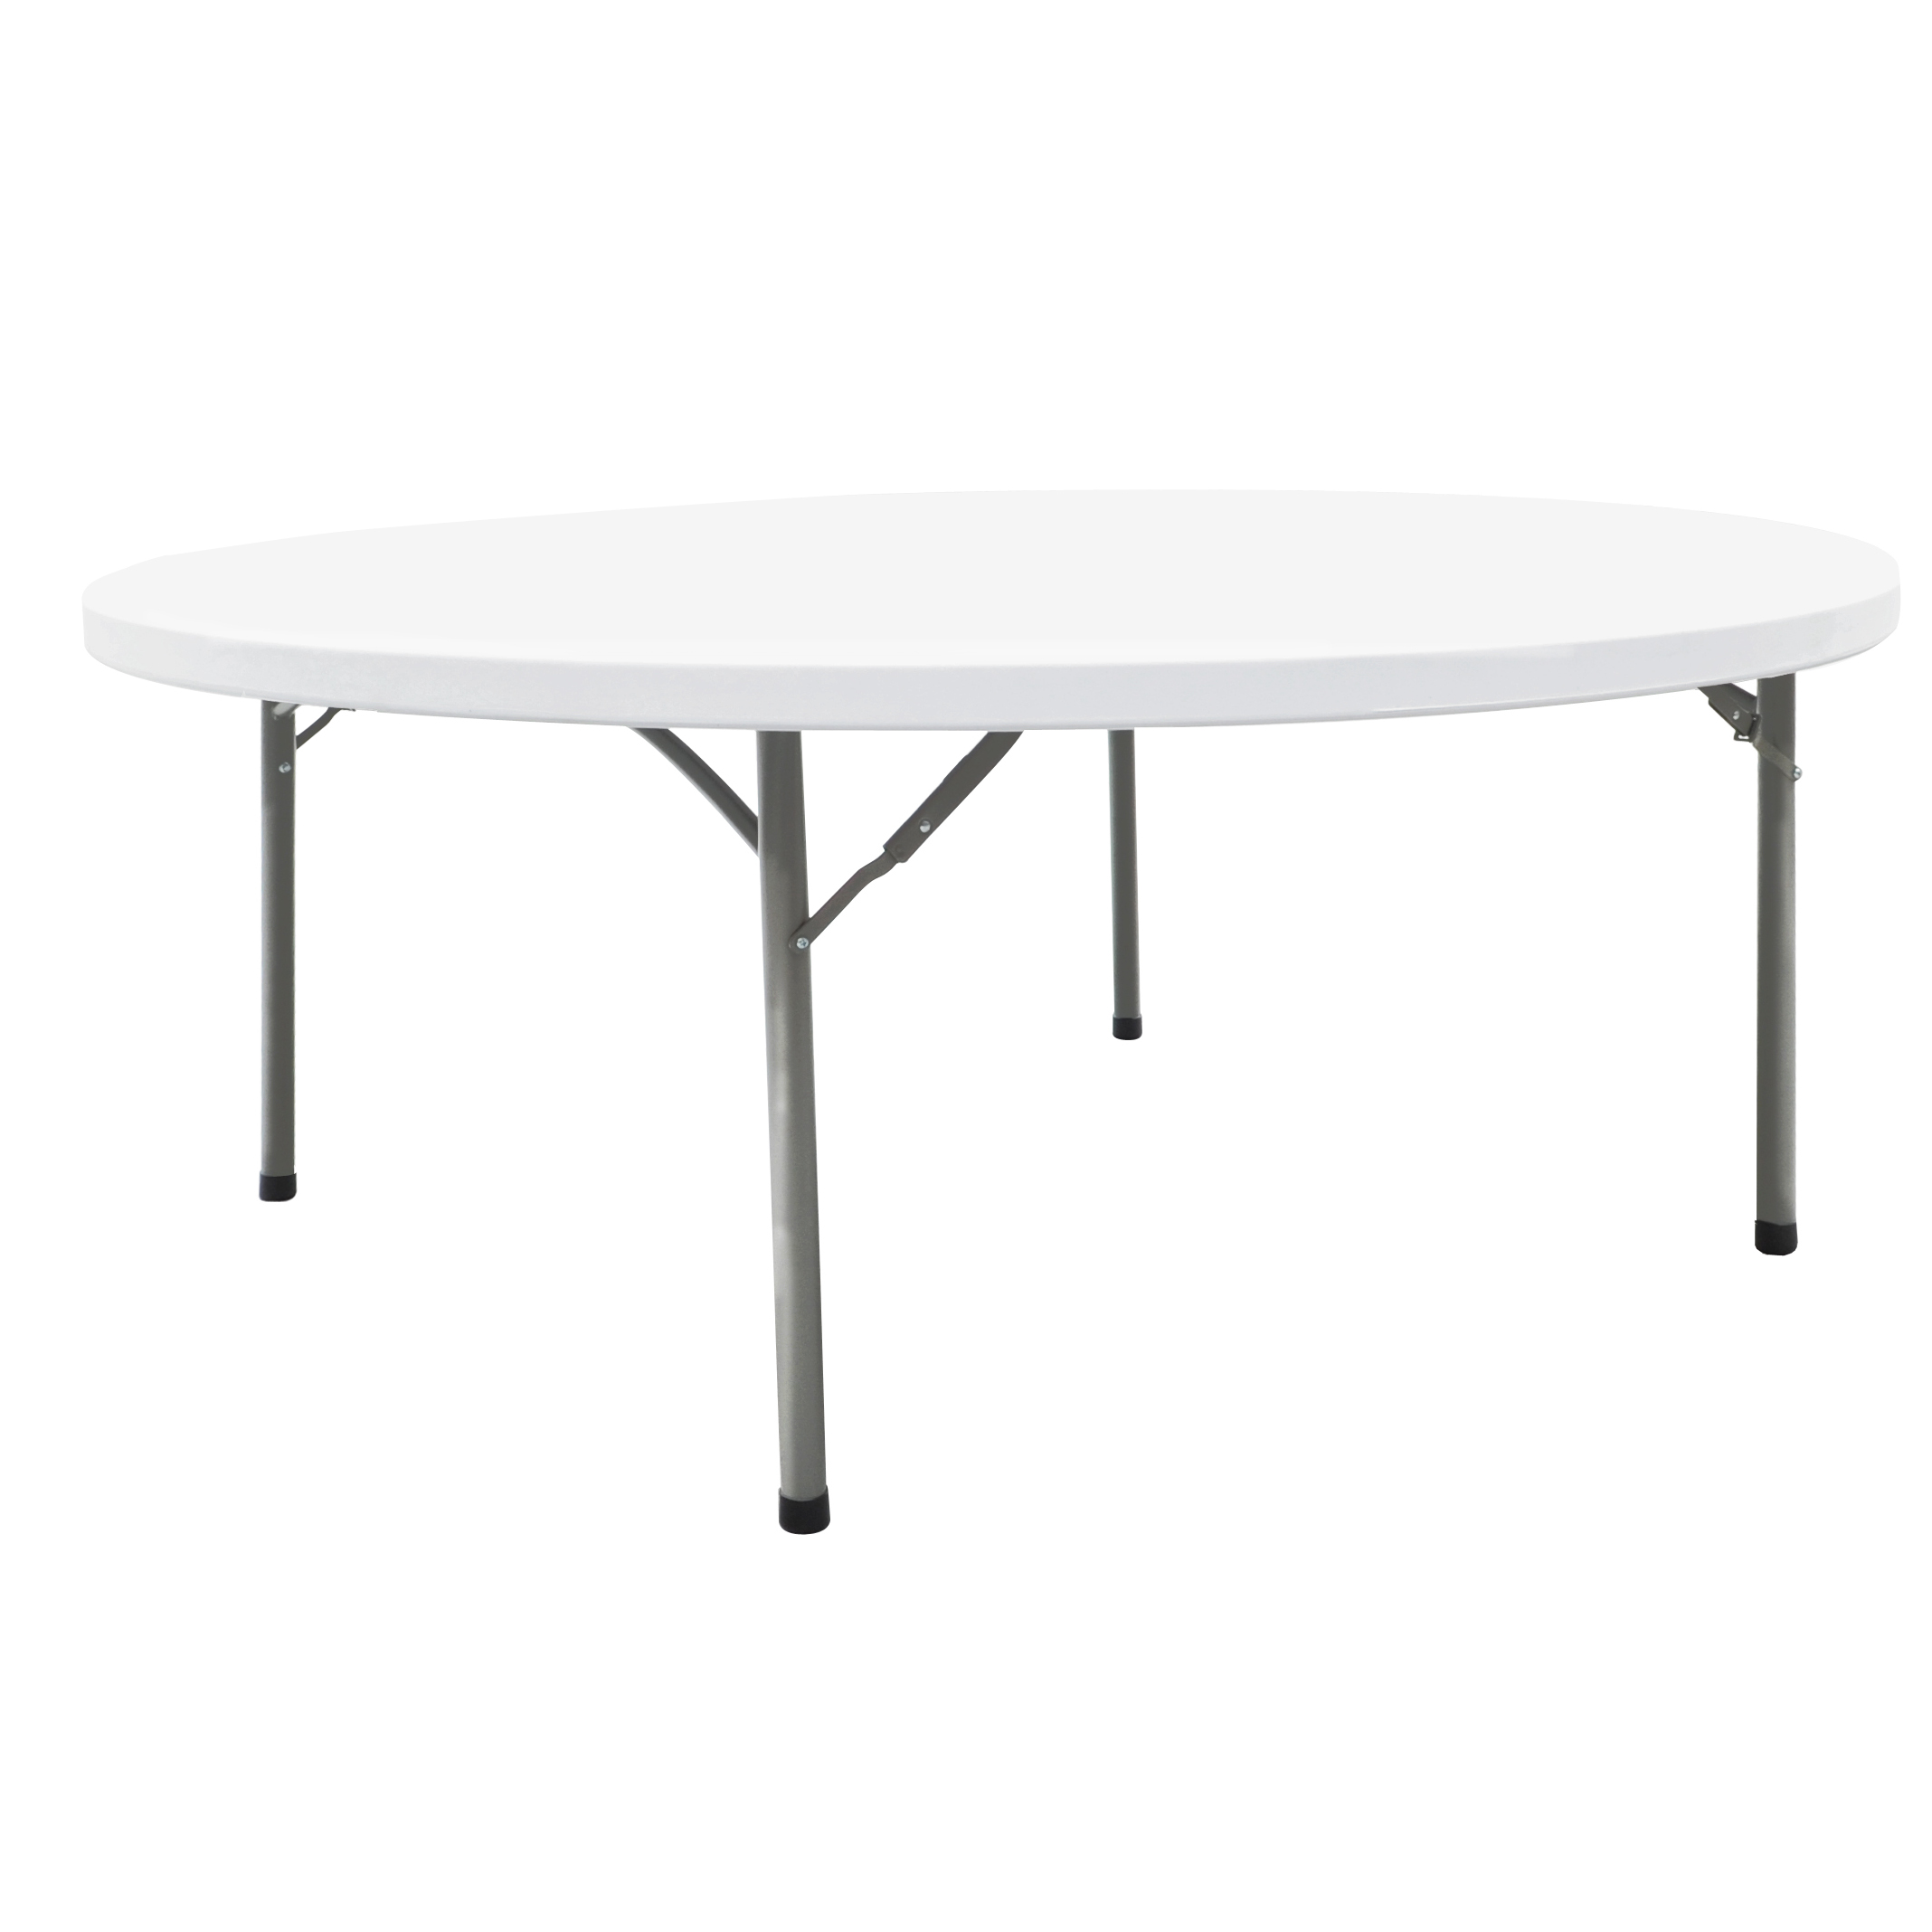 60-inch round table